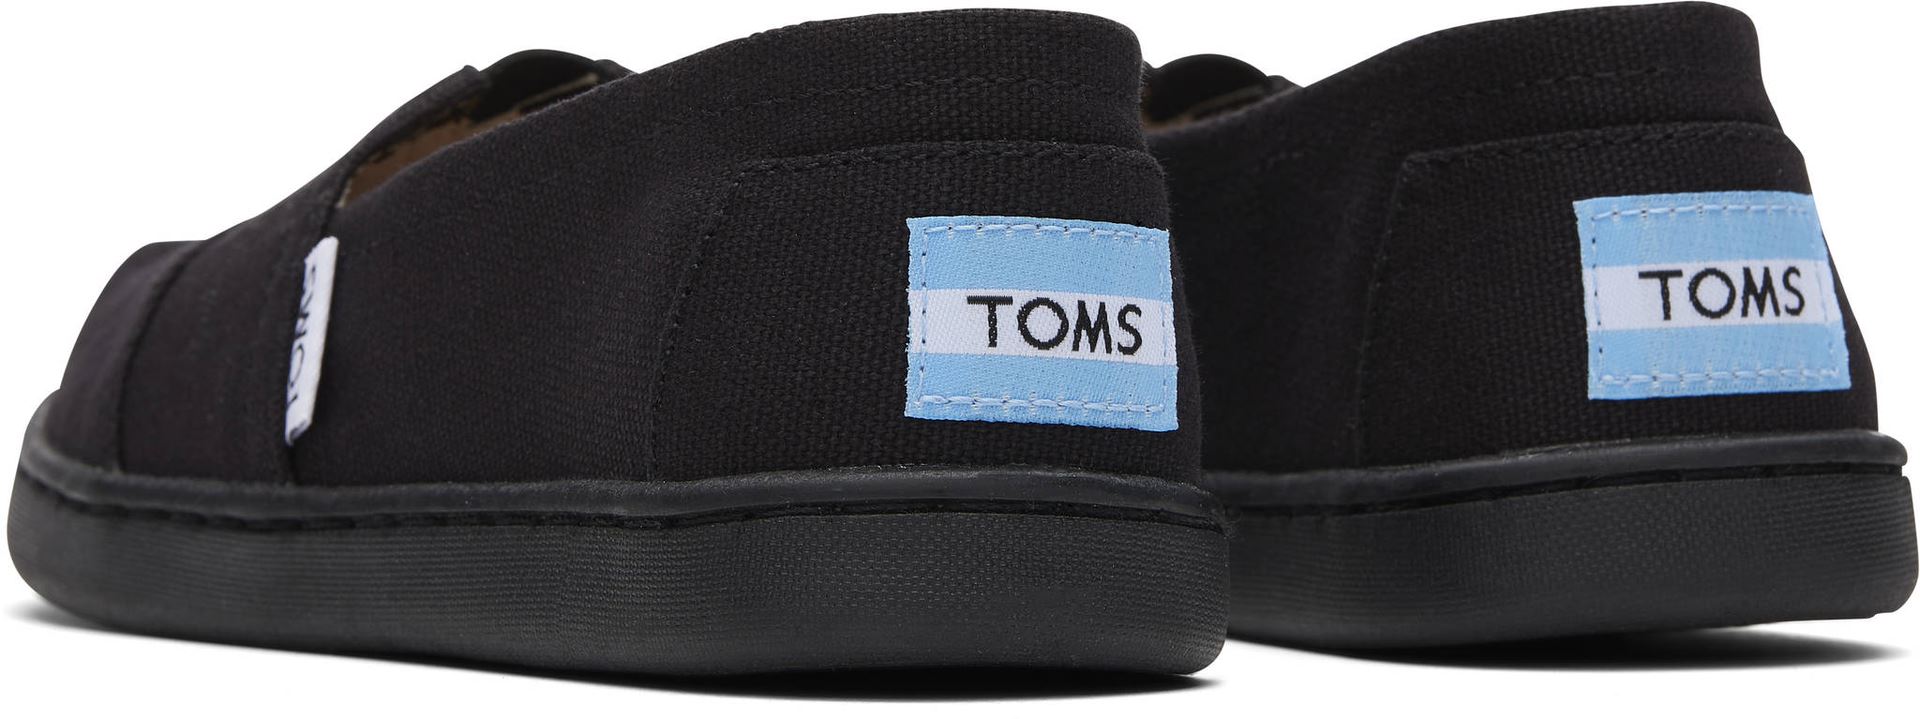 A unisex canvas shoe by TOMS, style Alpargata, a slip on in black. Back view of a pair.